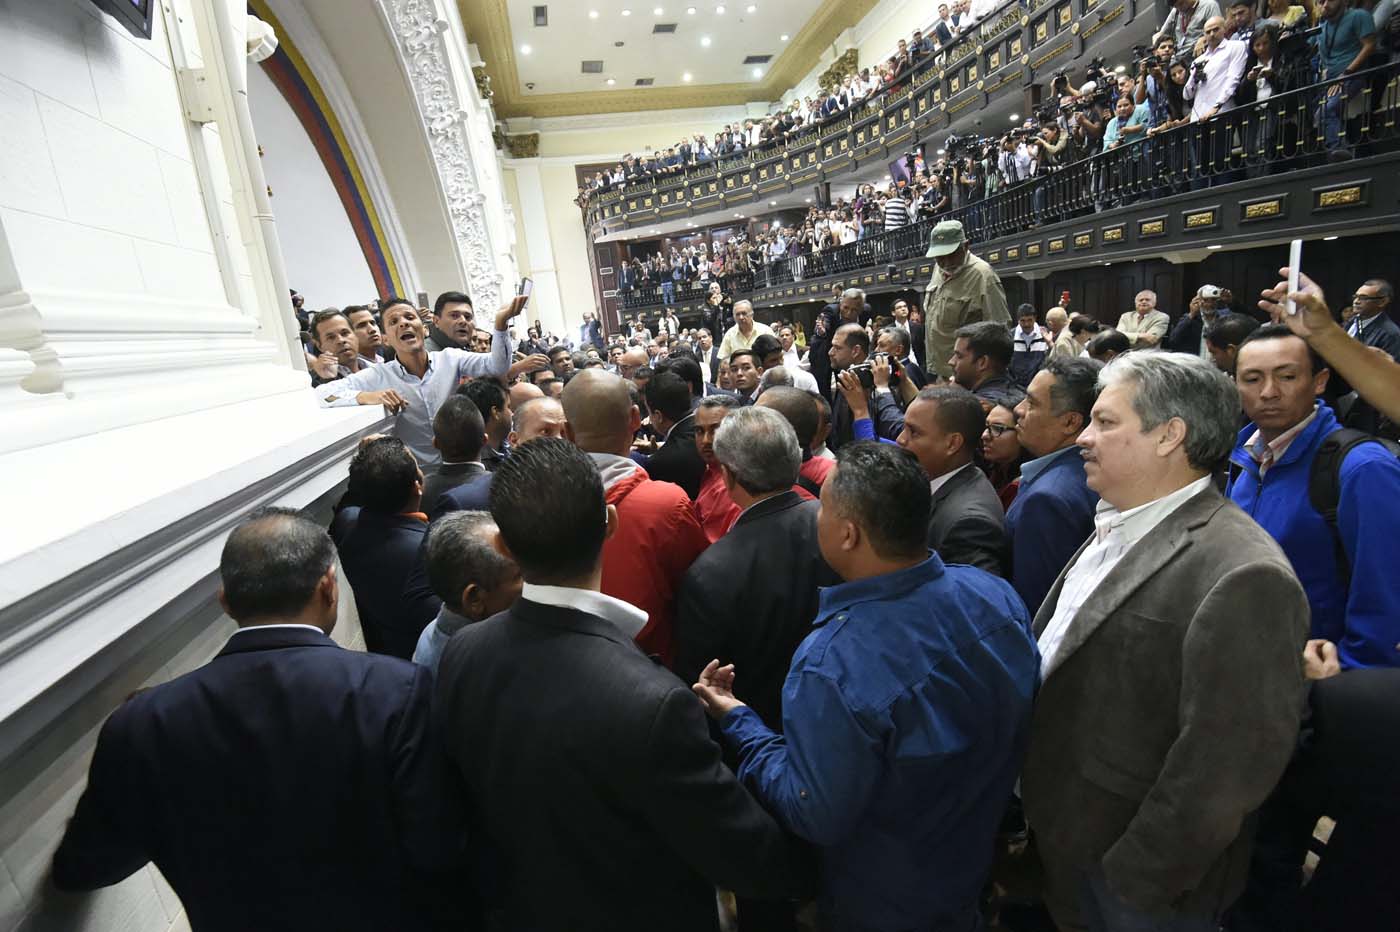 Members of the National Assembly react as supporters of Venezuelan President Nicolas Maduro force their way during an extraordinary session called by opposition leaders, in Caracas on October 23, 2016. The Democratic Unity Movement(MUD), opposite to Nicolas Maduro's government called a Parliamentary session to discuss restructuring of the Boliviarian Republic of Venezuela's Constitution, the constitutional order and democracy as main issues. Demonstrators outside the building forced their entrance to interrupt the debate and the session was suspended. / AFP PHOTO / JUAN BARRETO